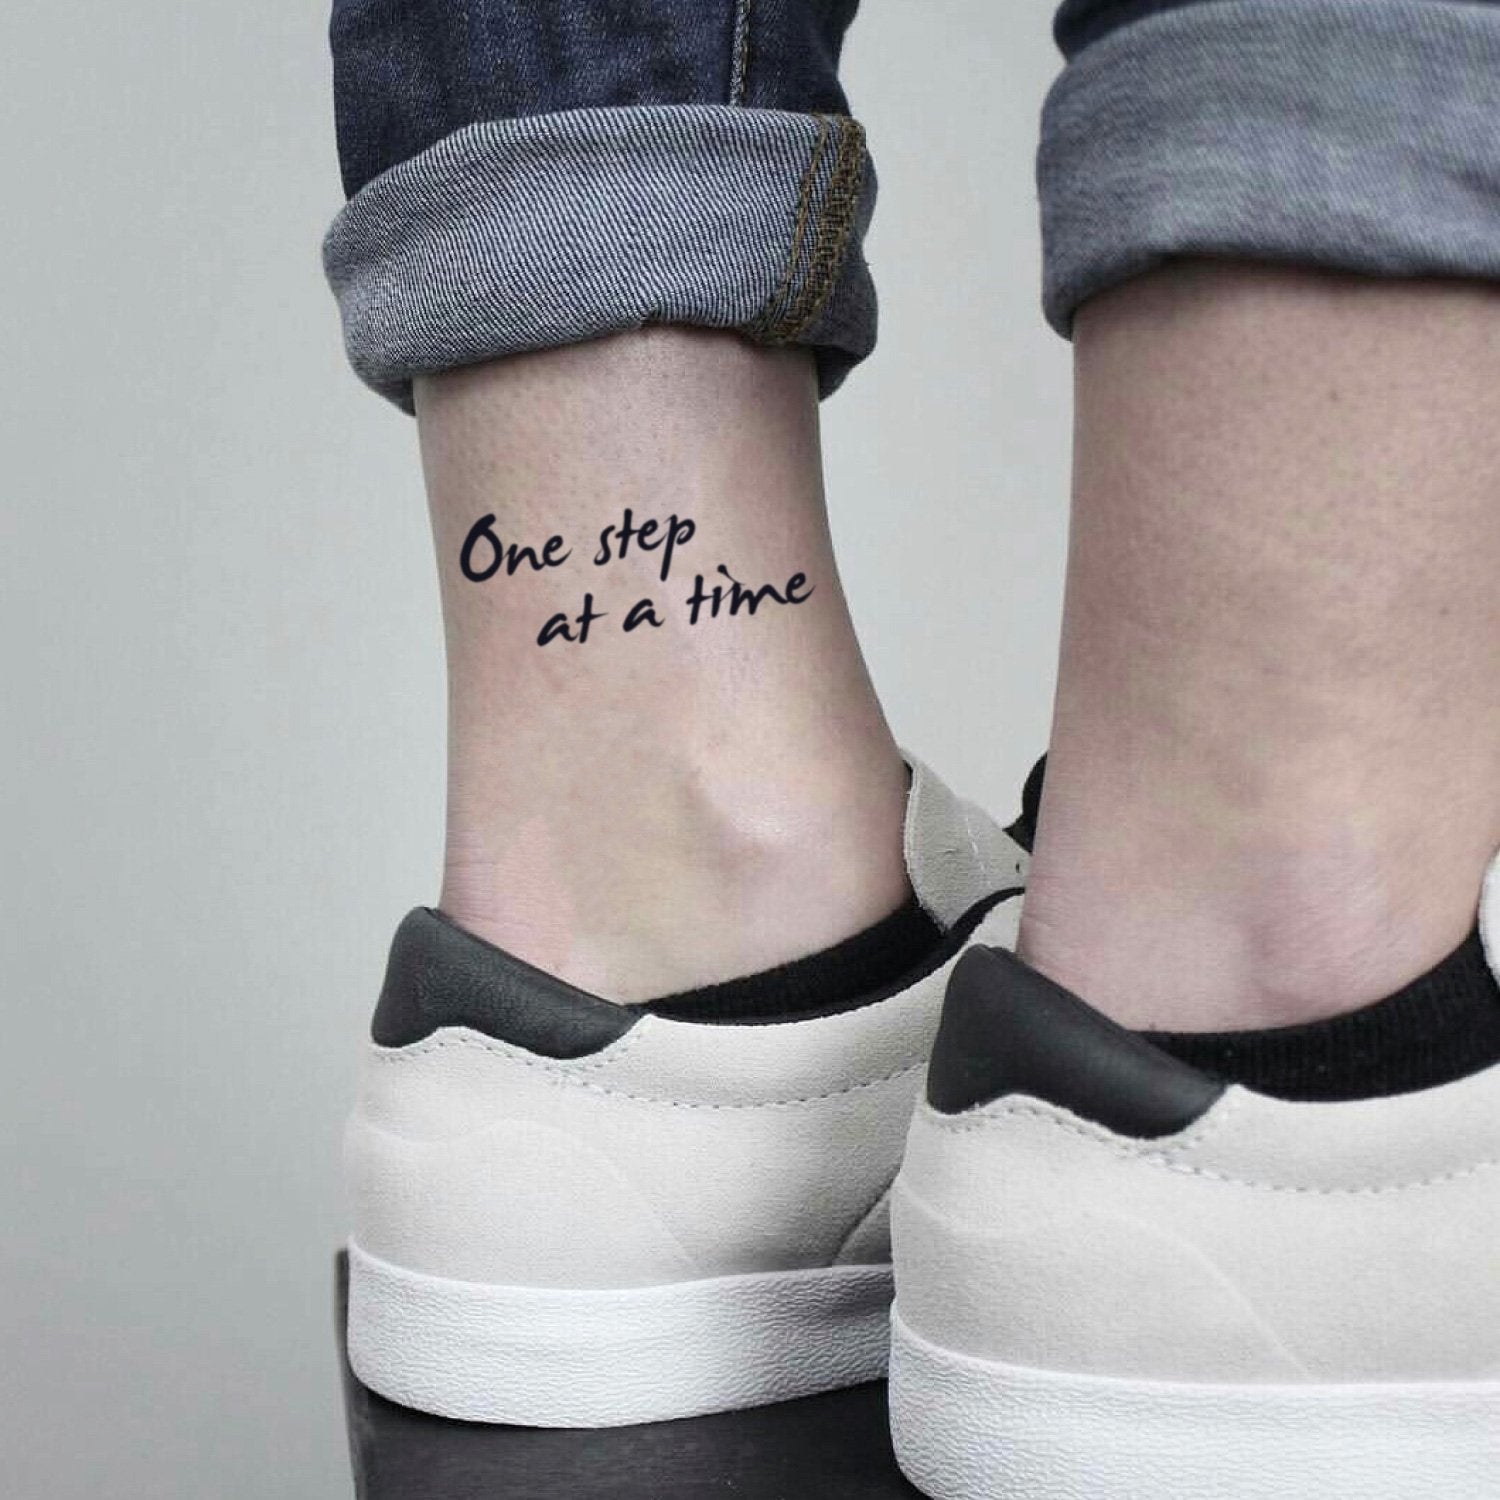 fake small one step at a time lettering temporary tattoo sticker design idea on ankle